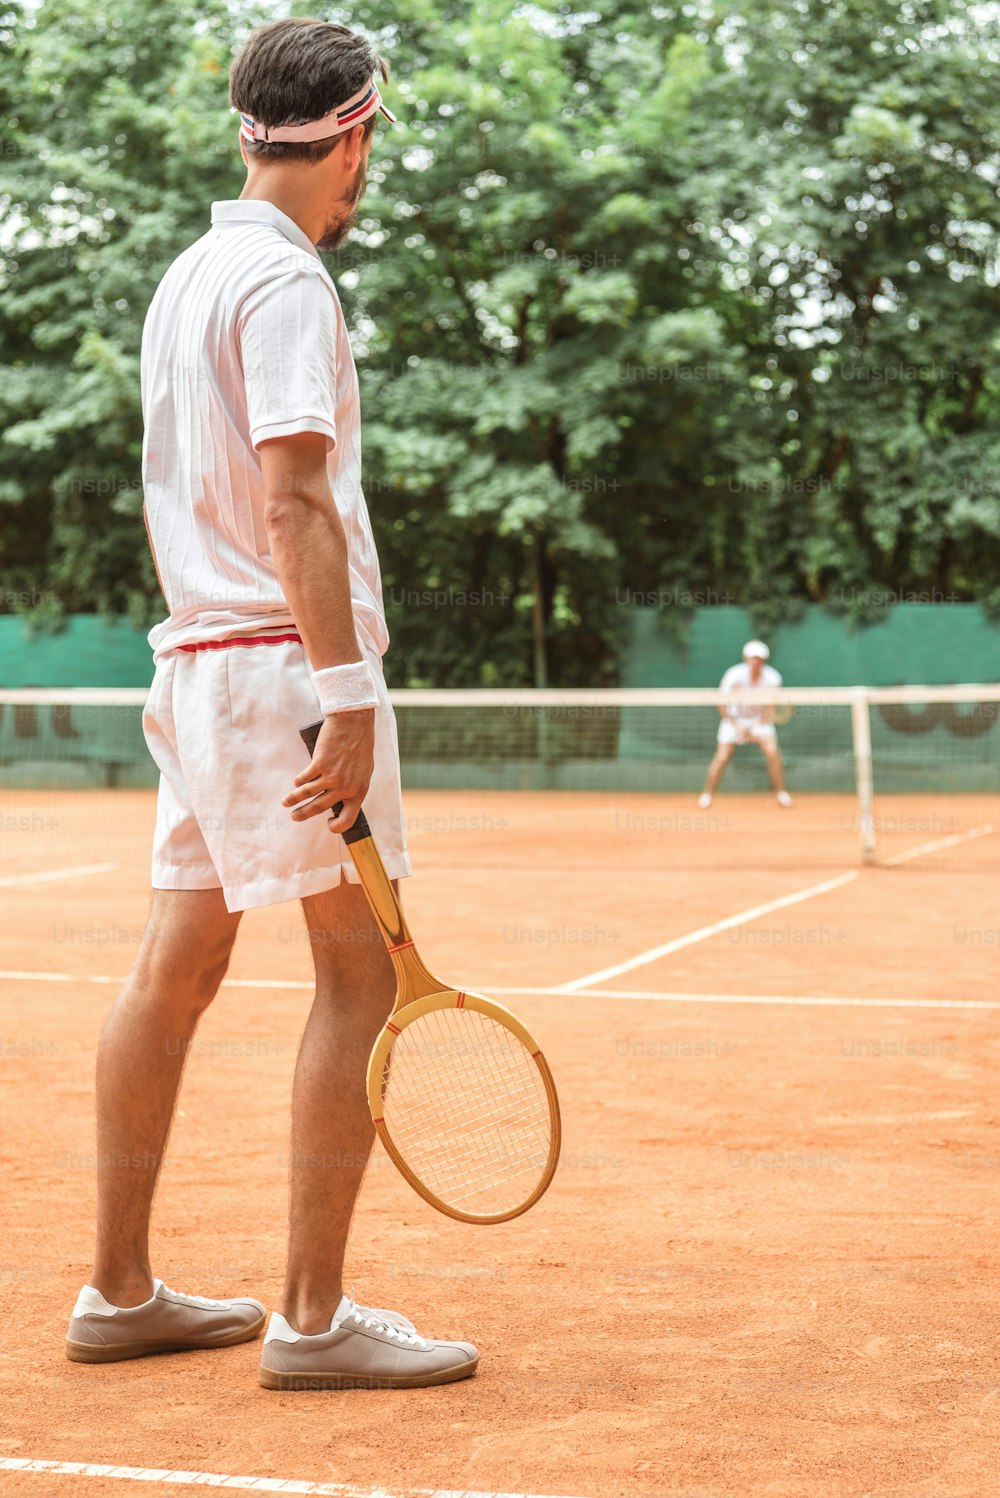 back view of man playing tennis with wooden racket on tennis court